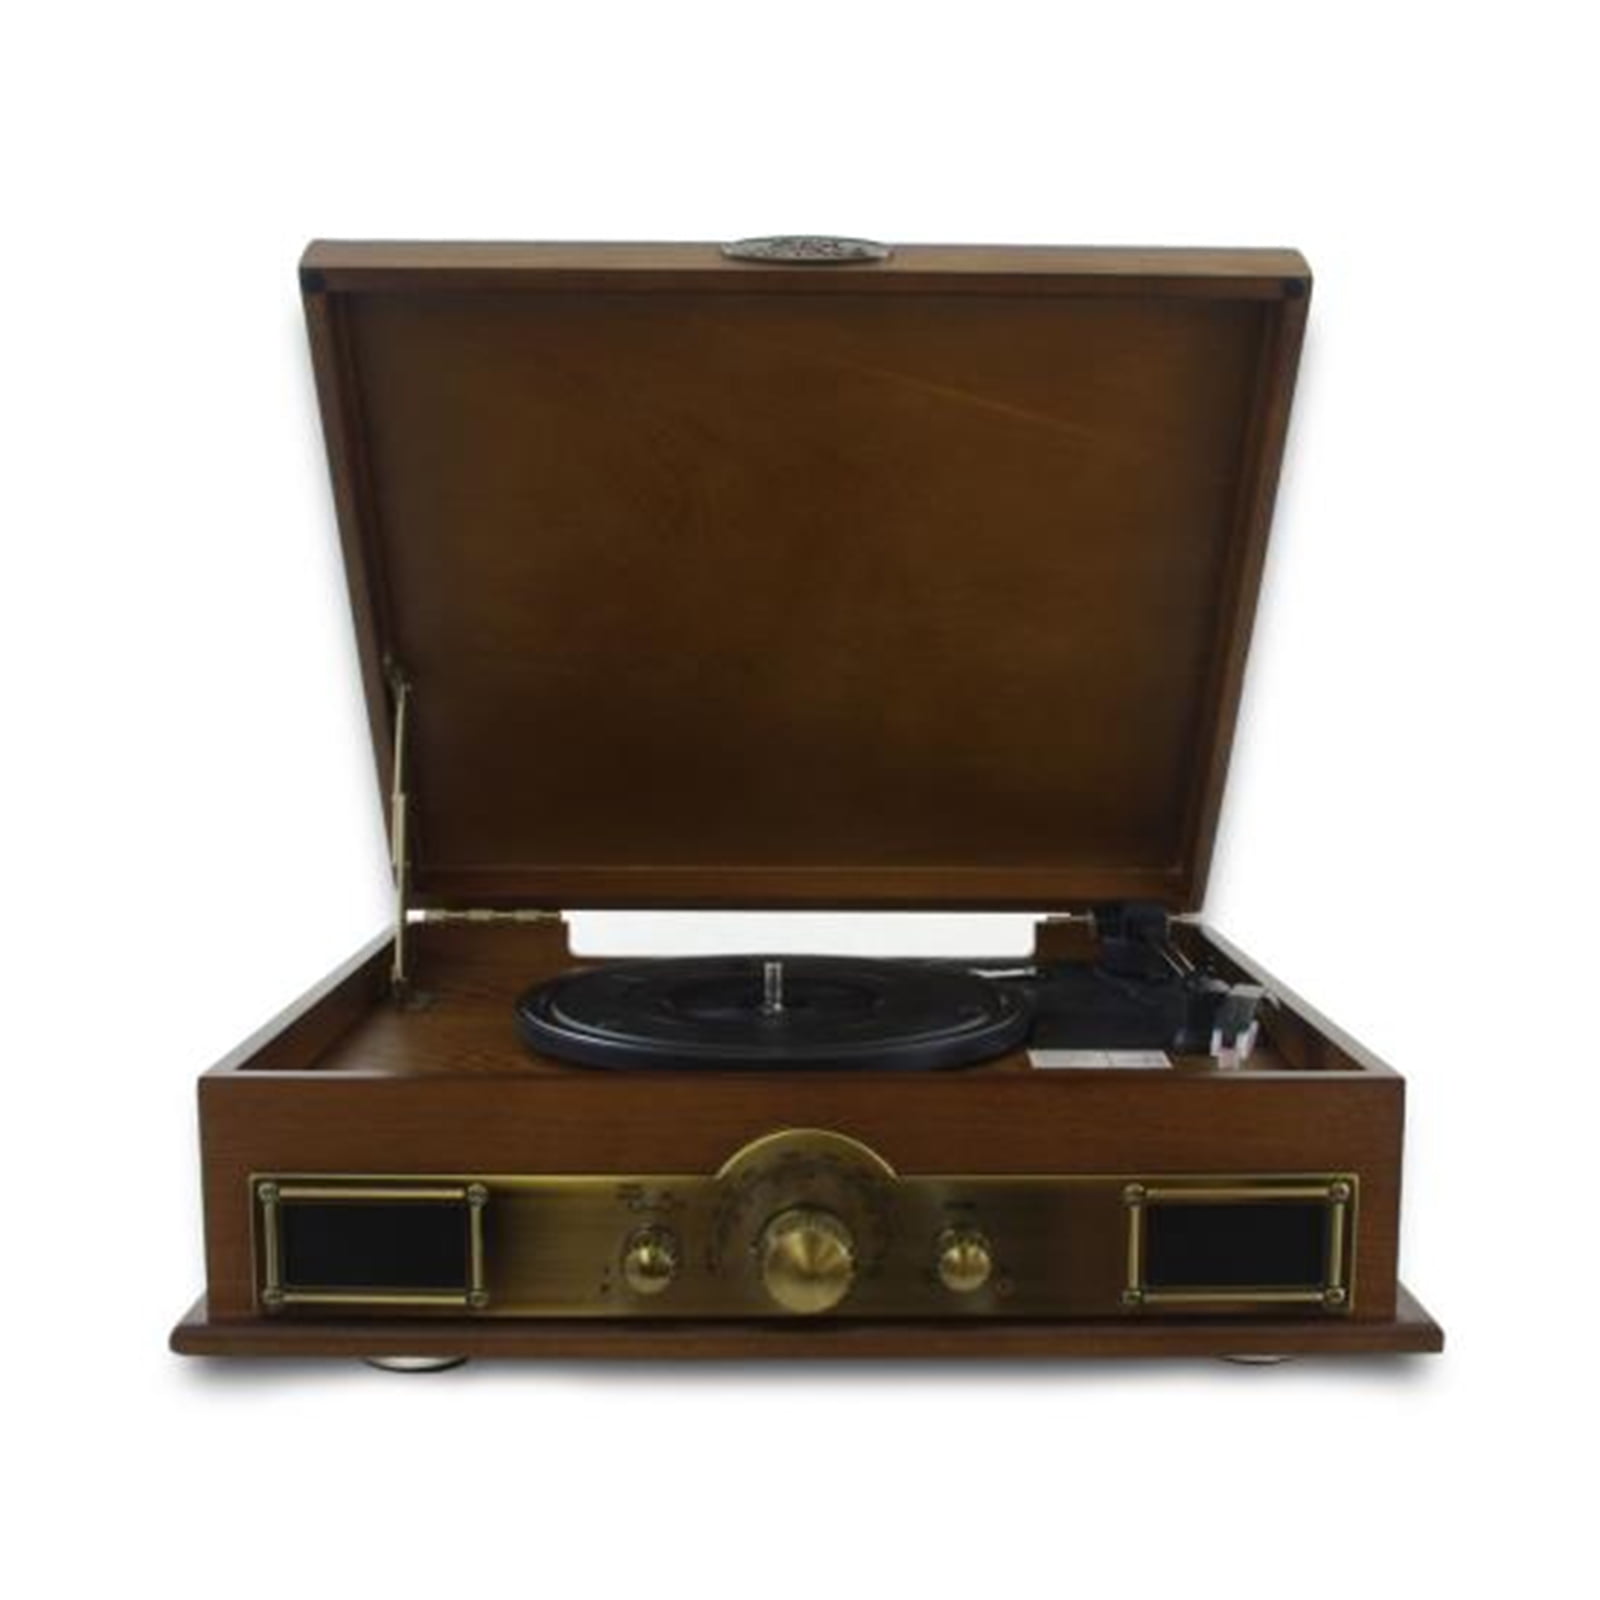 Vintage Classic-Style BT Turntable Vinyl Record Player with MP3 ...